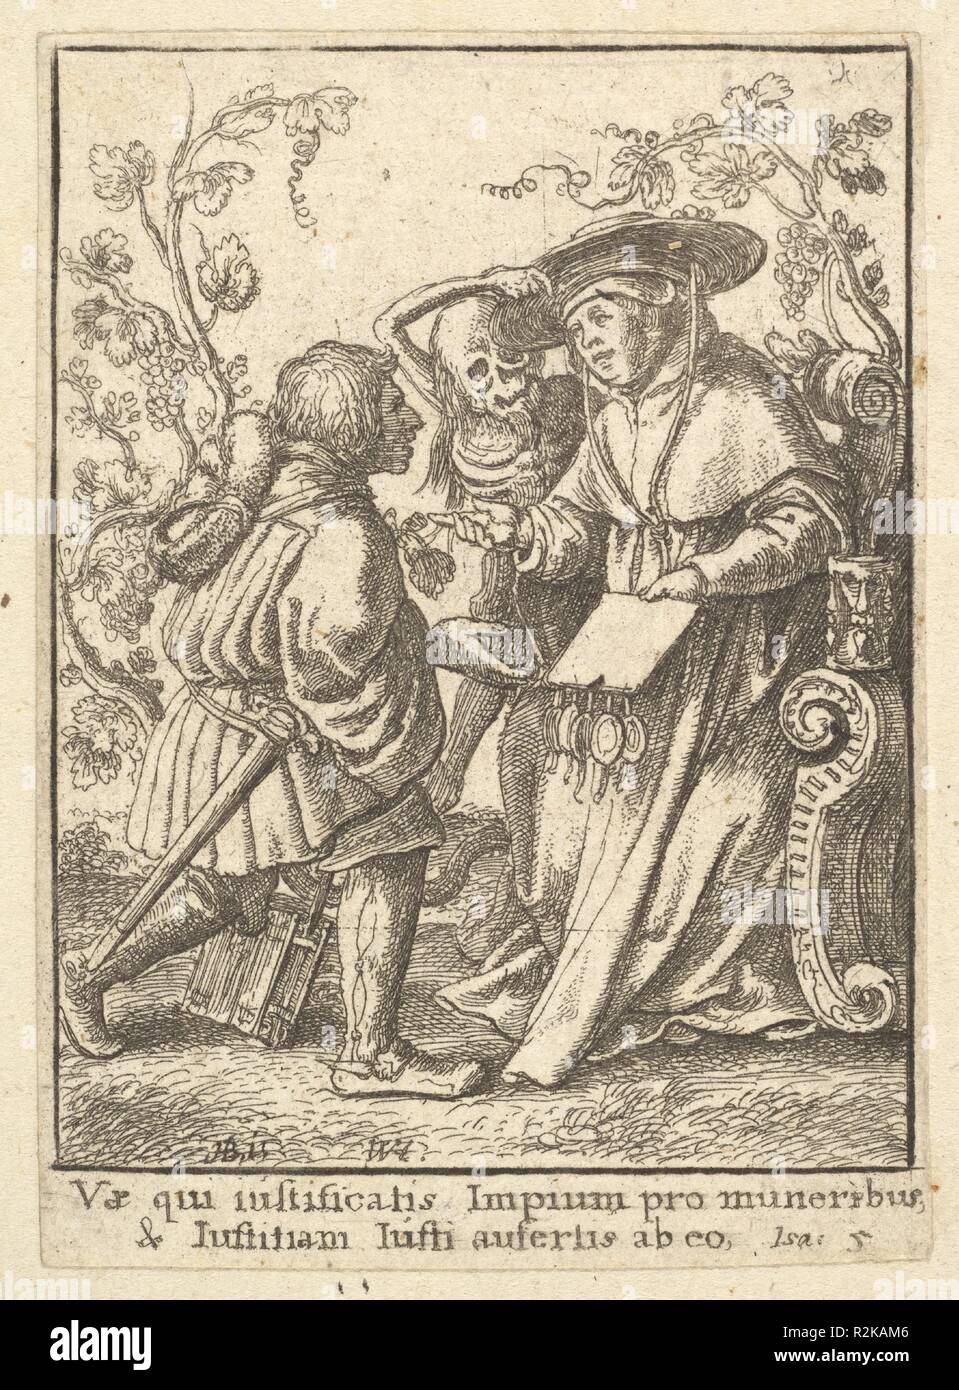 Cardinal, from the Dance of Death. Artist: After Hans Holbein the Younger (German, Augsburg 1497/98-1543 London). Dimensions: Sheet: 2 15/16 × 2 1/16 in. (7.4 × 5.3 cm). Etcher: Wenceslaus Hollar (Bohemian, Prague 1607-1677 London). Series/Portfolio: Dance of Death, after Holbein. Date: 1651.  The Cardinal; Death removes the hat from a cardinal seated on the right, who is handing to a man on the left a document with five seals. Museum: Metropolitan Museum of Art, New York, USA. Stock Photo